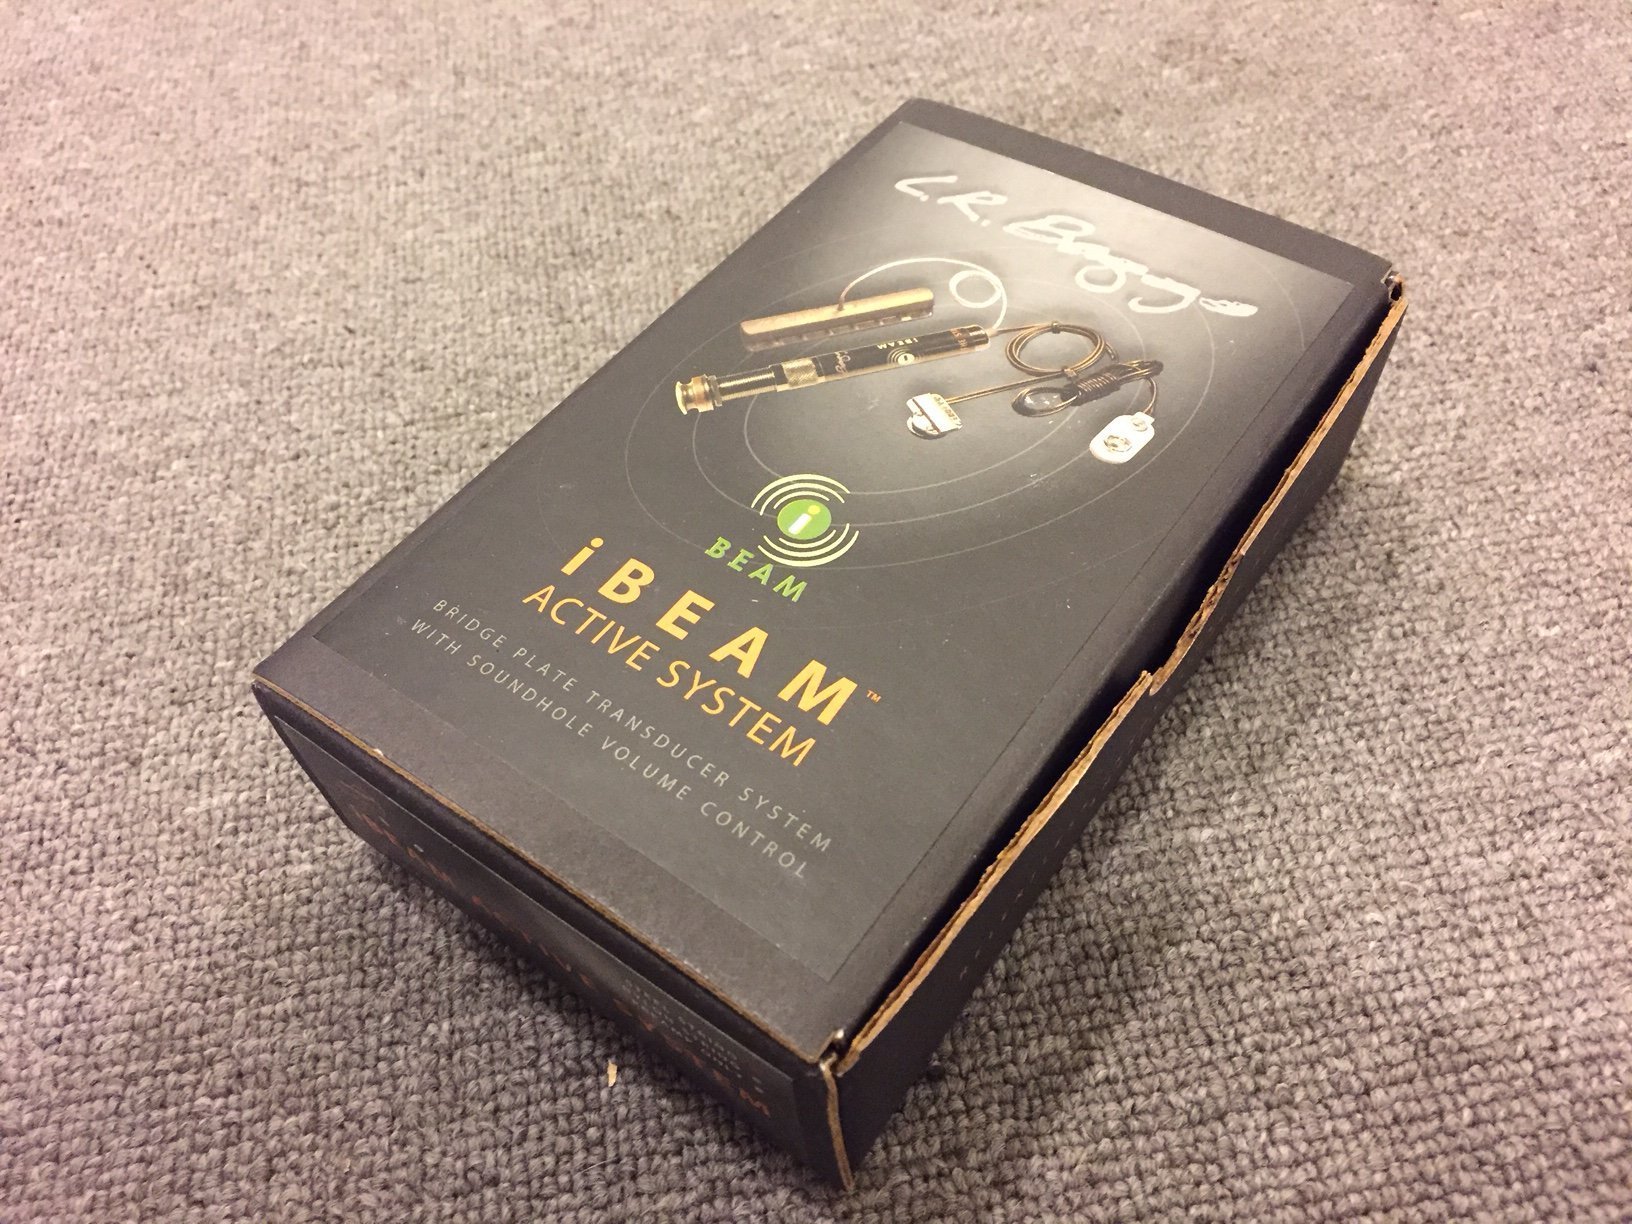 L.R.Baggs iBEAM Active System アコギ用ピックアップ - ギター